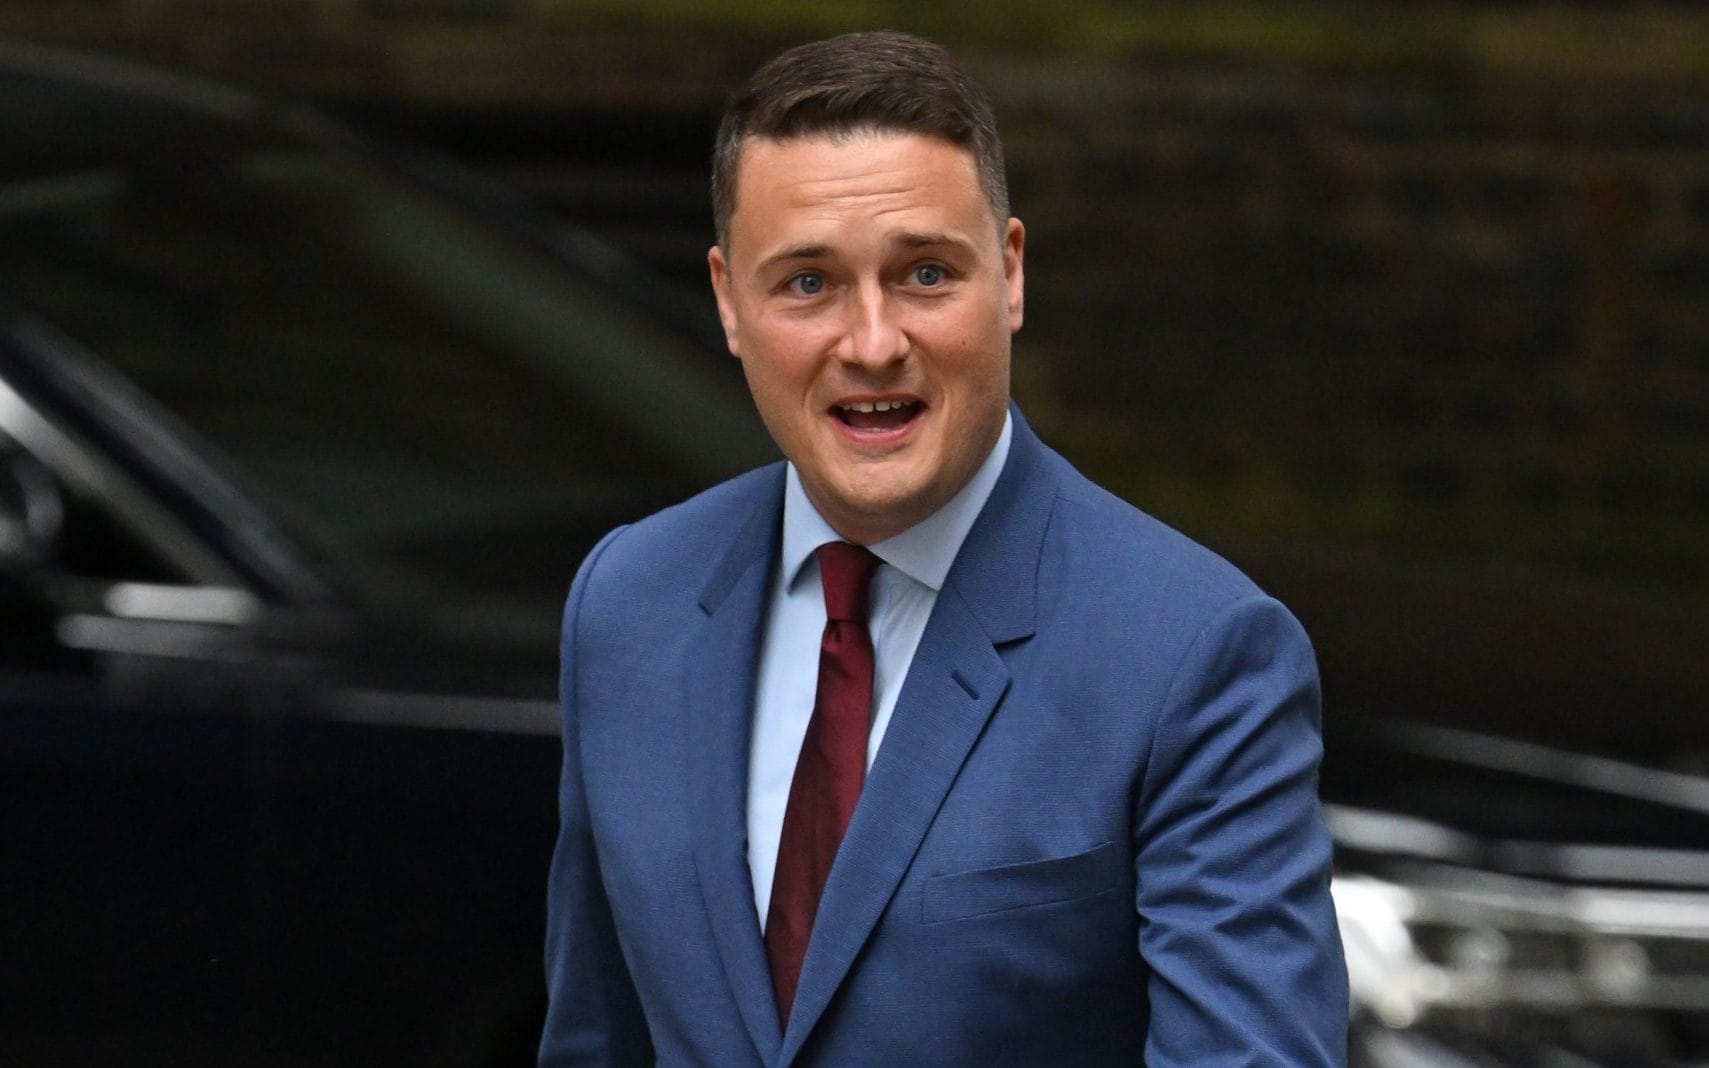 Wes Streeting will suffer unhinged abuse simply for protecting children